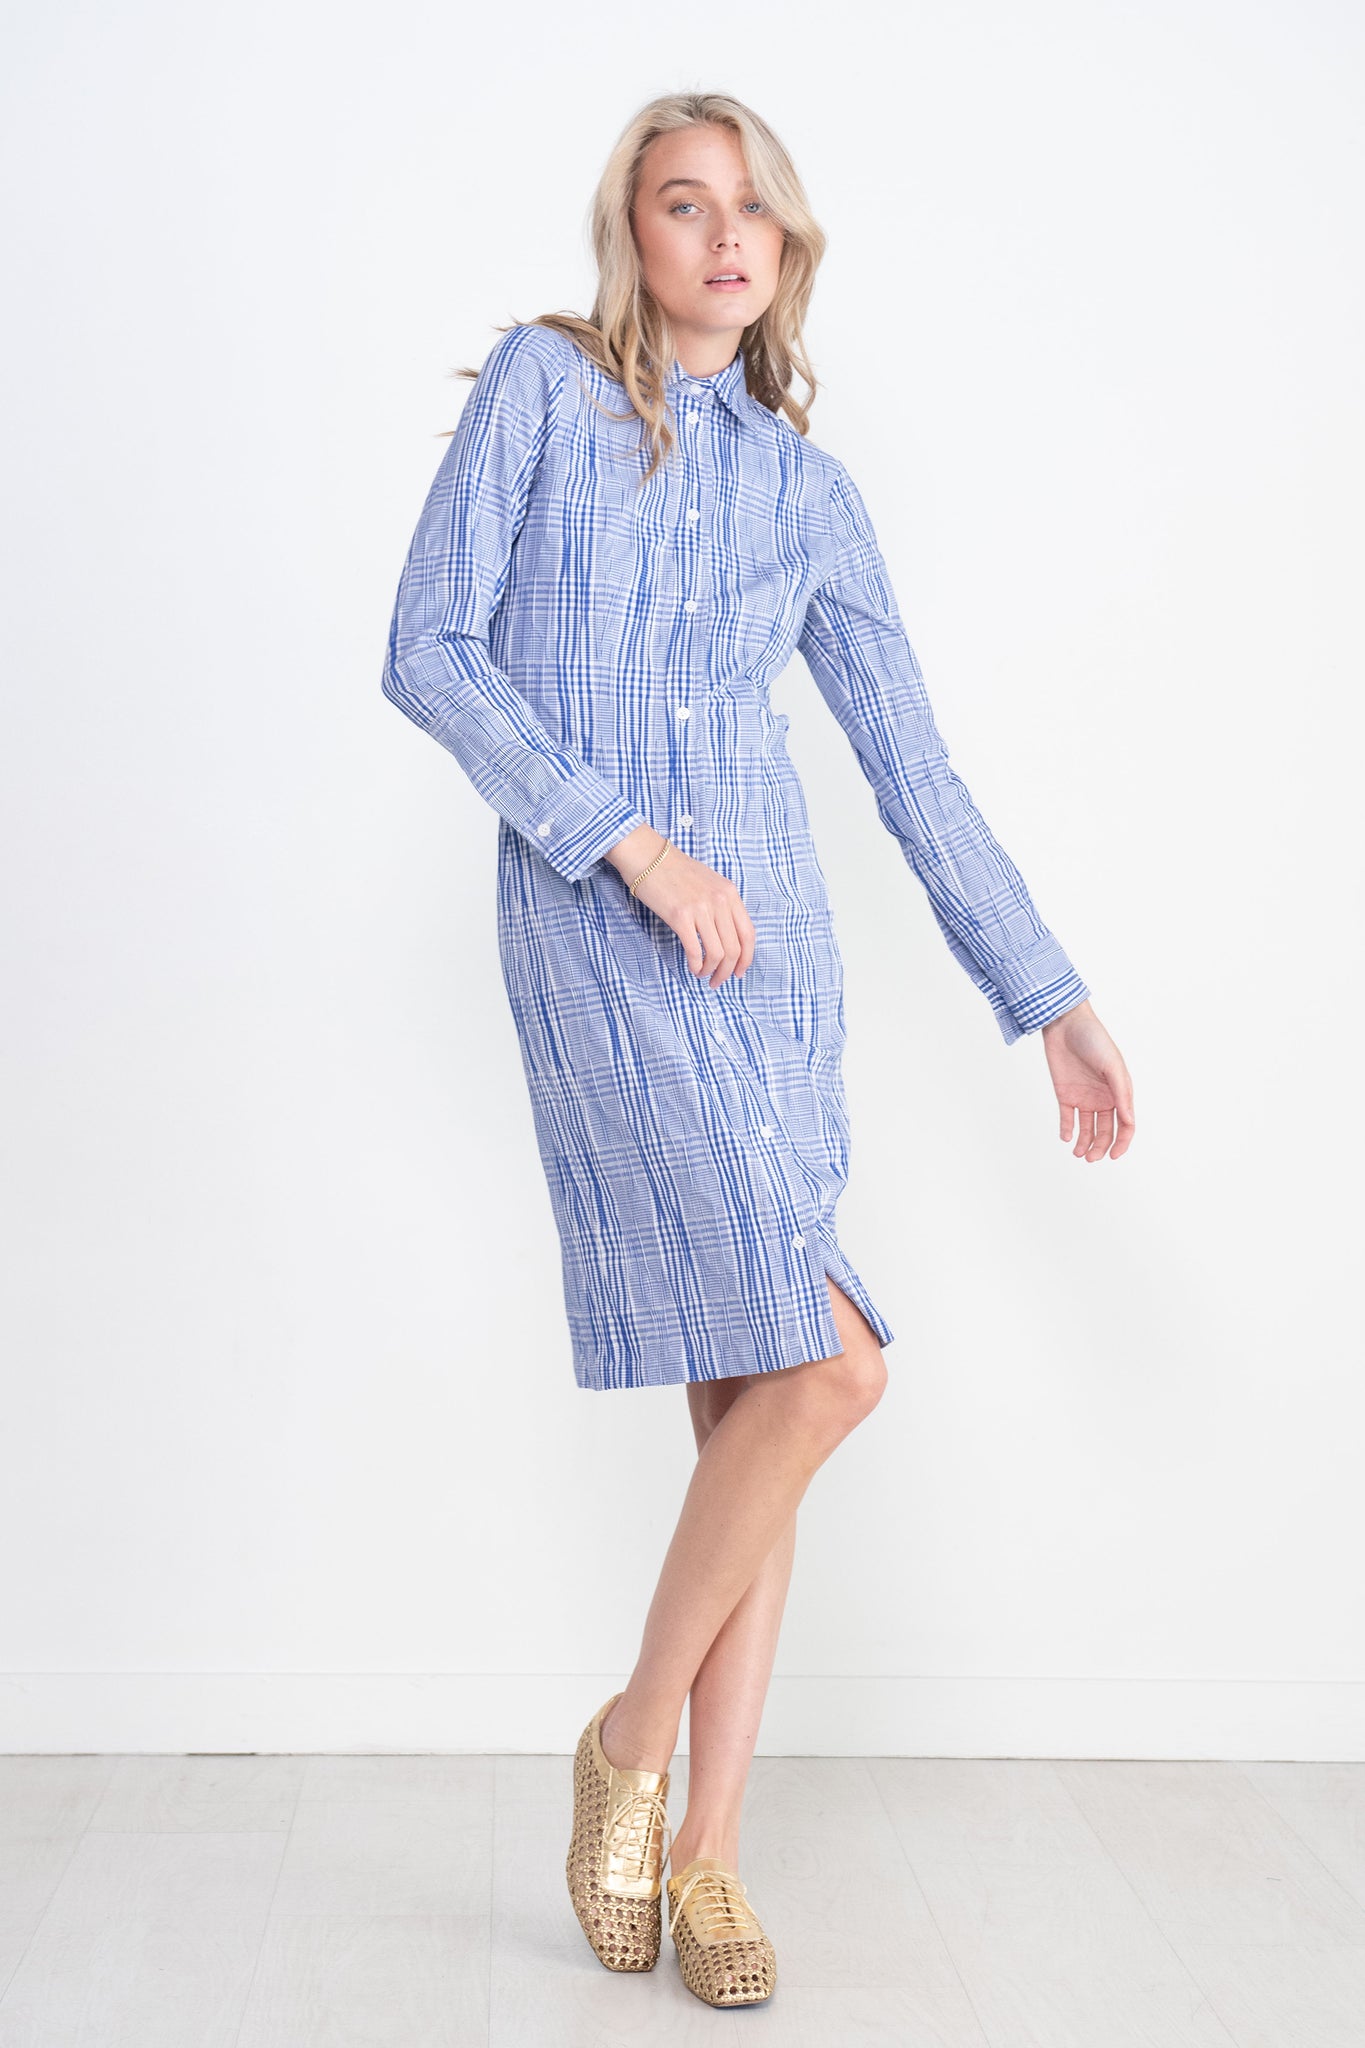 Nomia - Crinkle Plaid Fitted Shirtdress, Cobalt & White